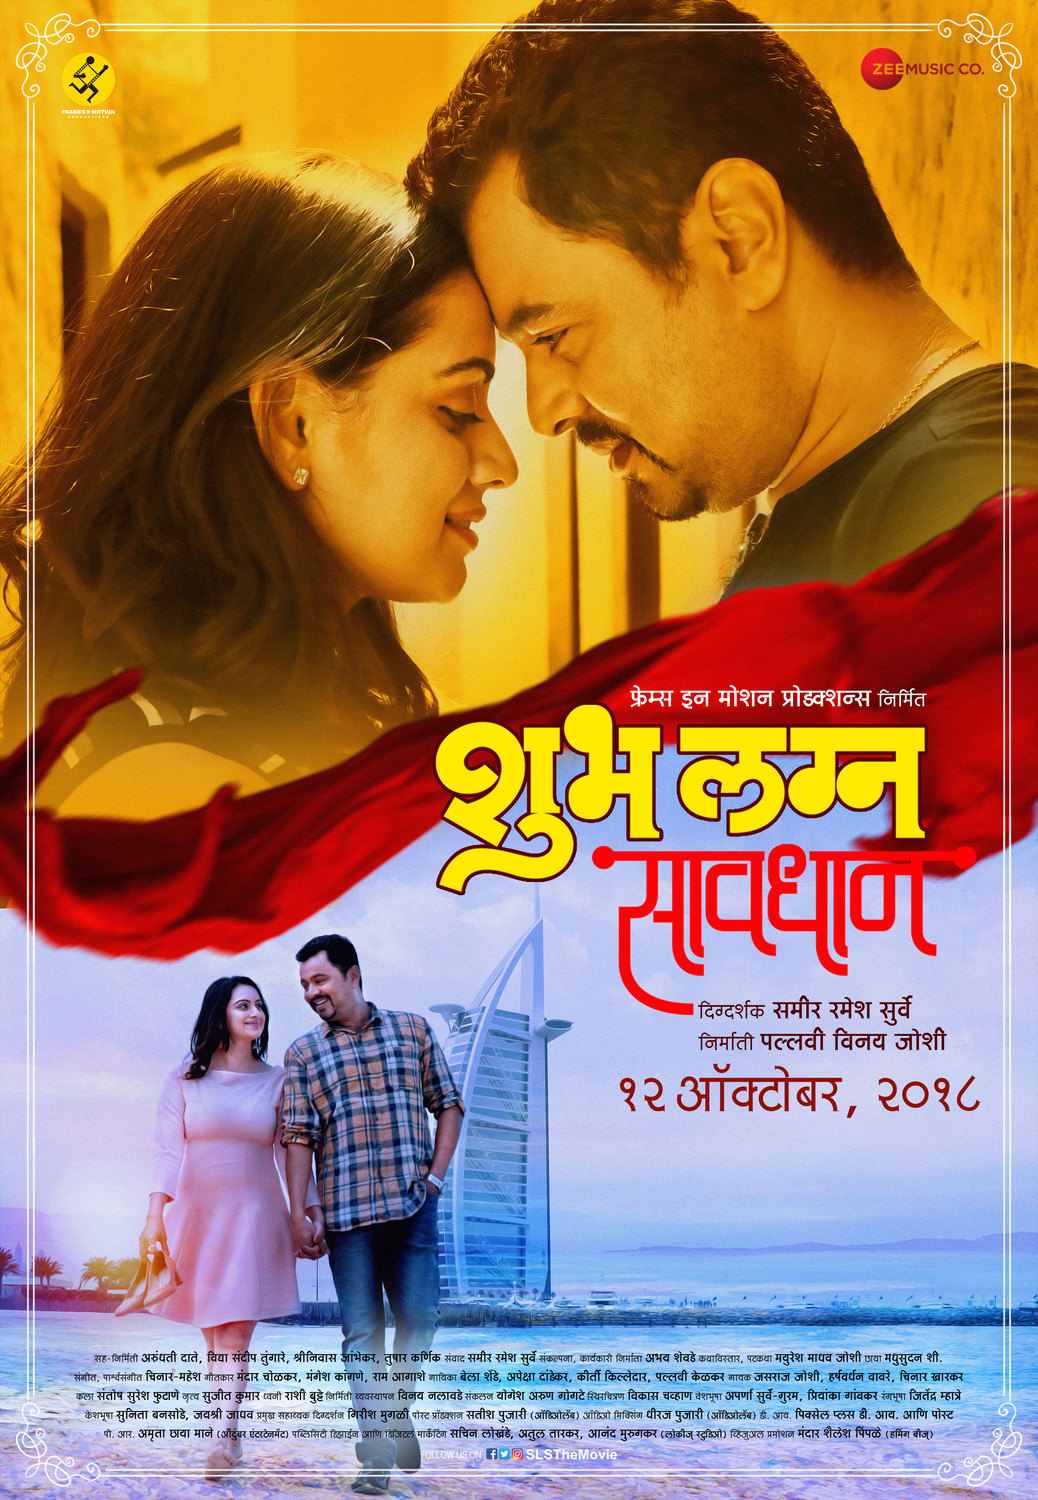 Extra Large Movie Poster Image for Shubh Lagna Savdhan (#3 of 4)